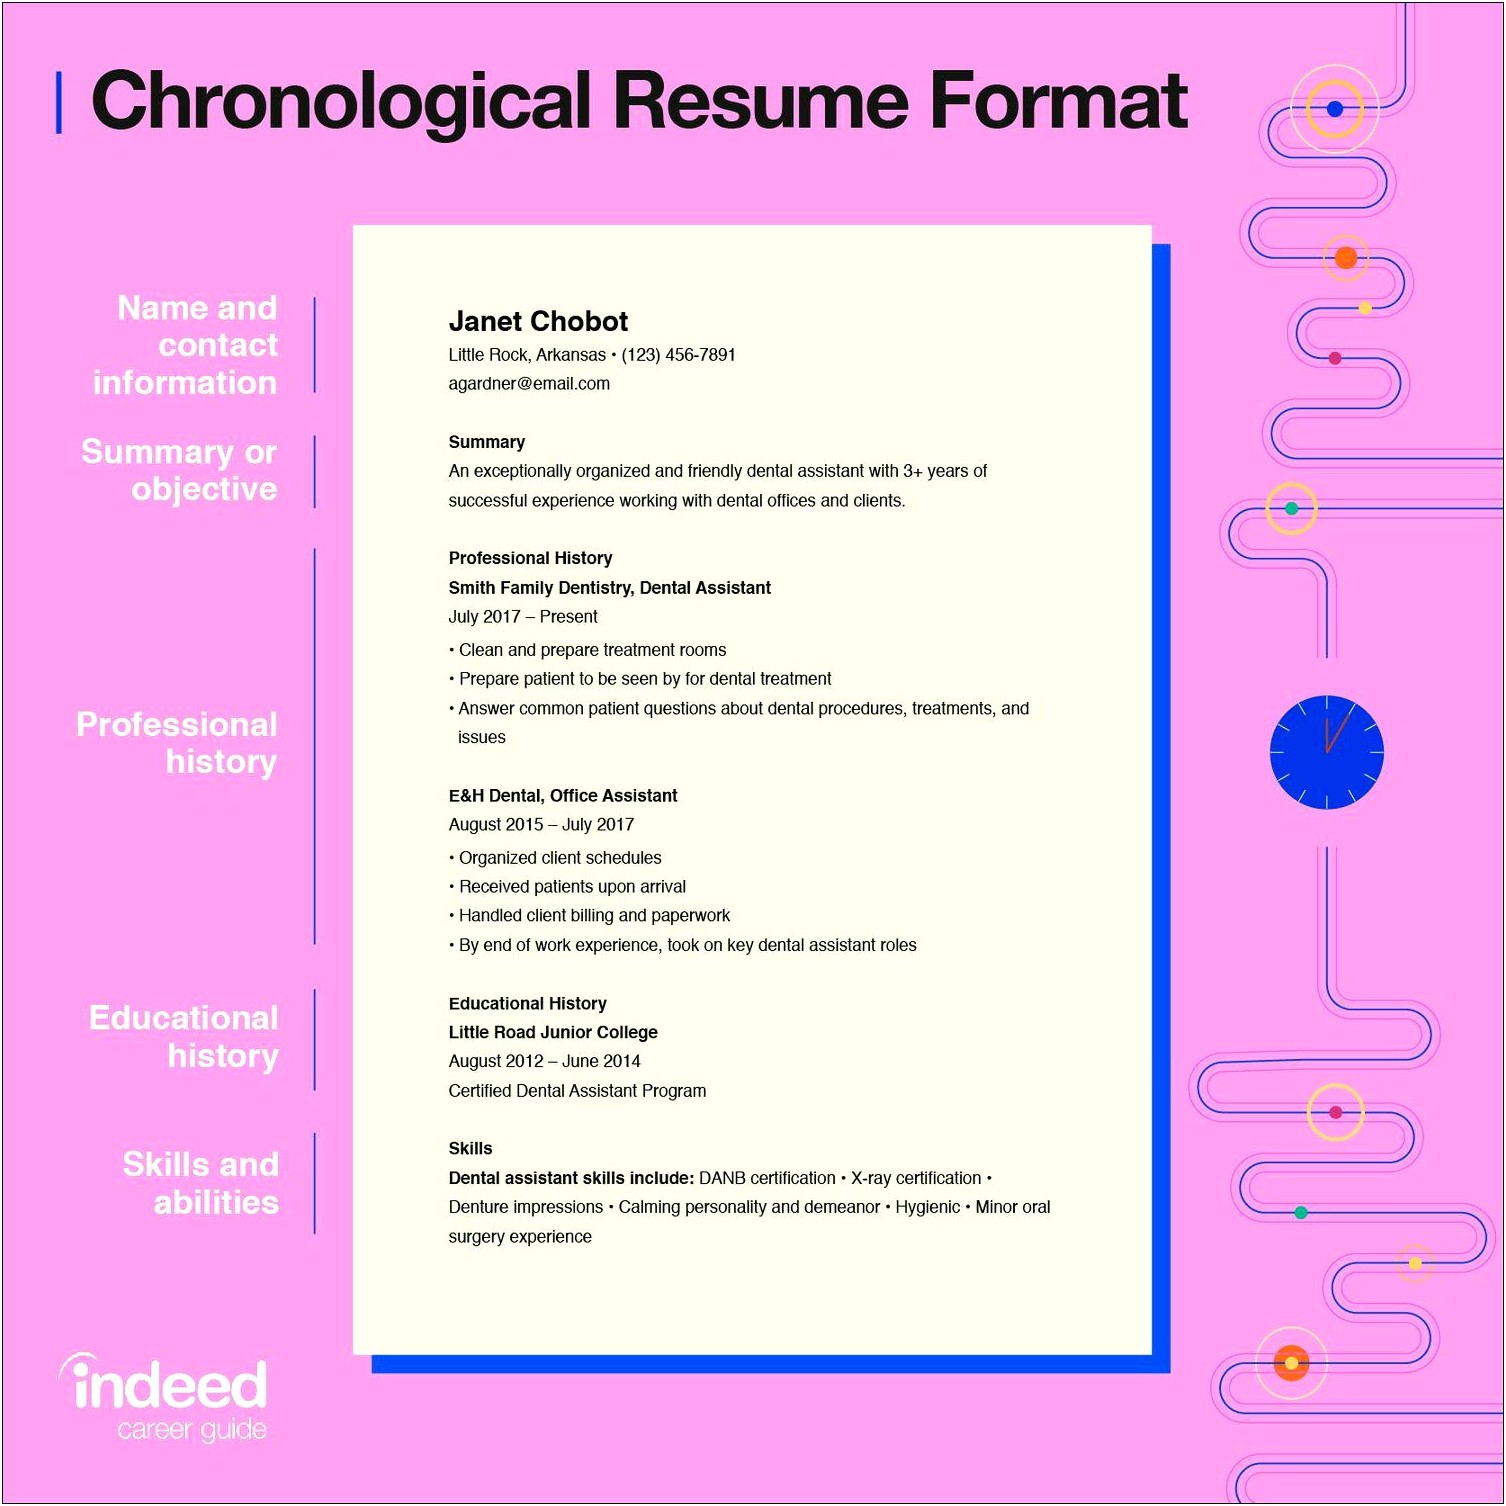 Having Two Current Jobs On Resume